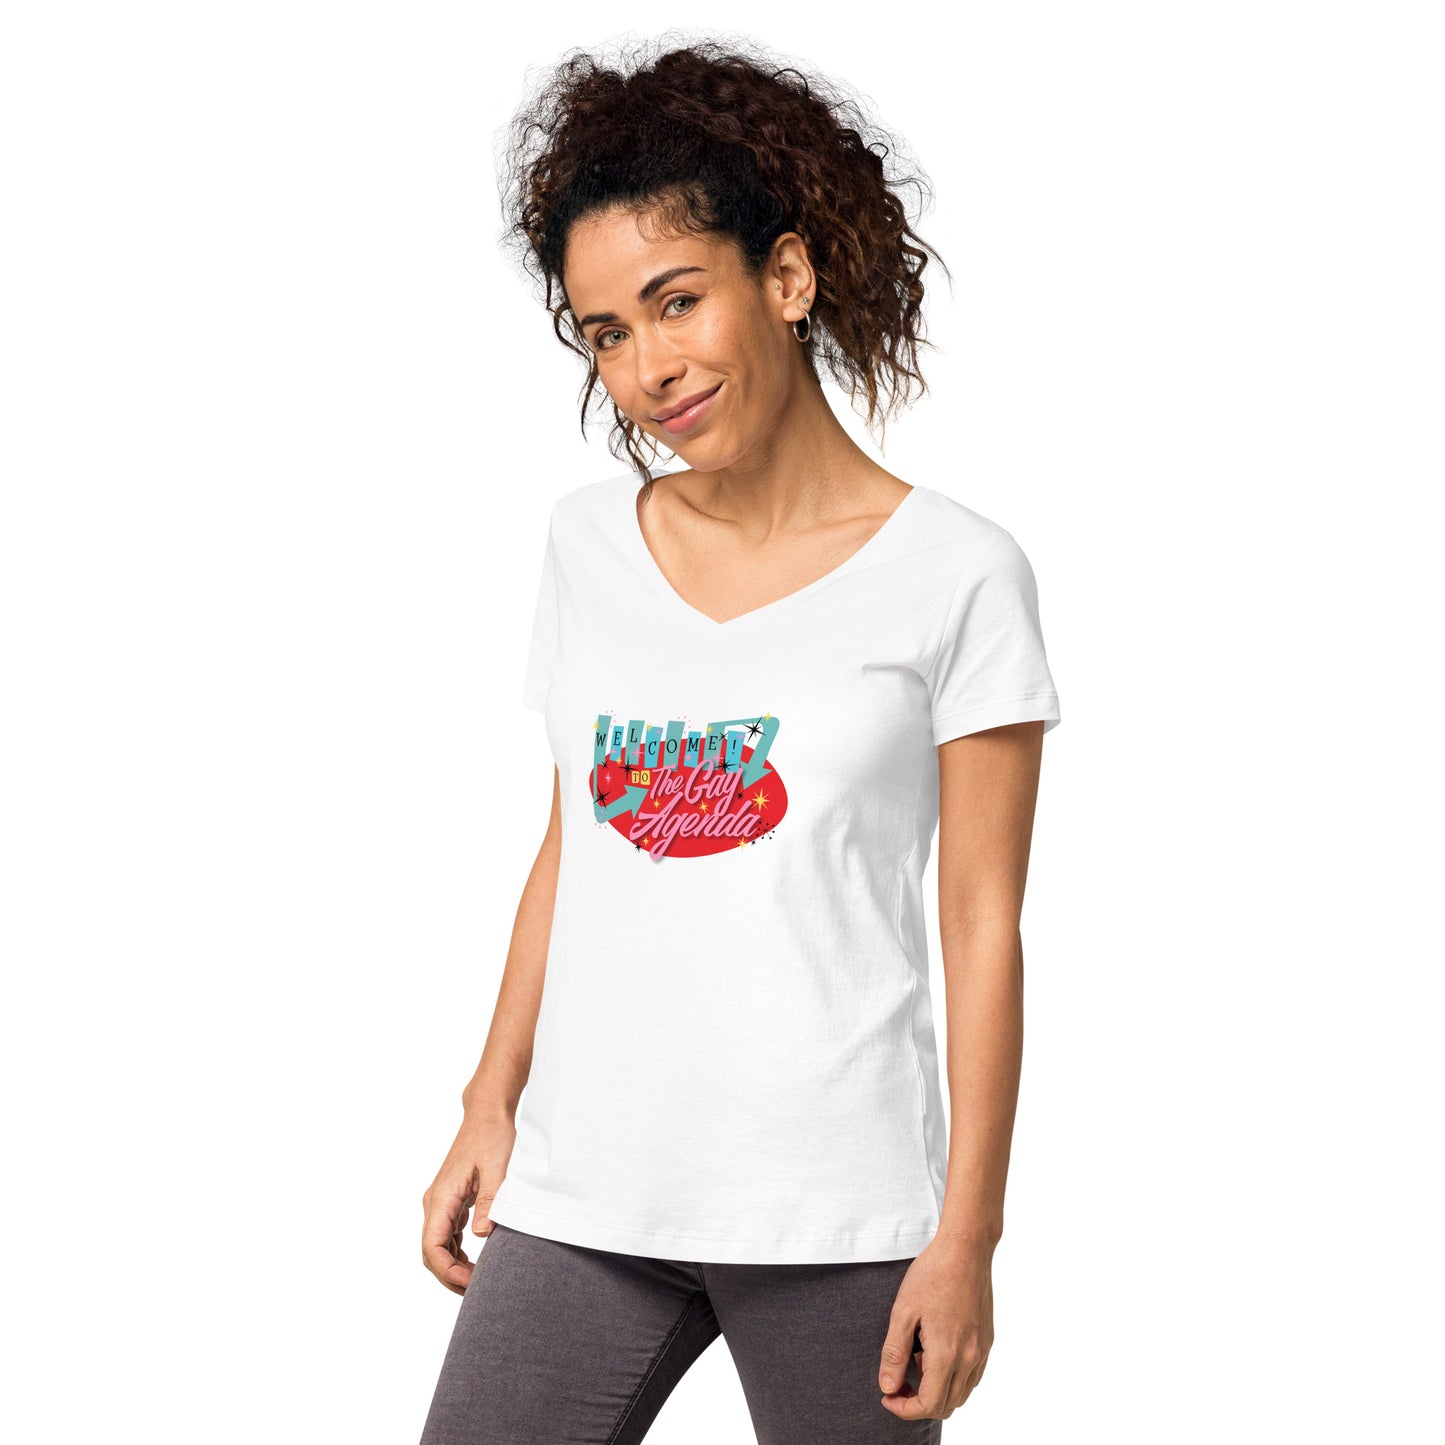 Welcome To The Gay Agenda - Women’s fitted v-neck t-shirt